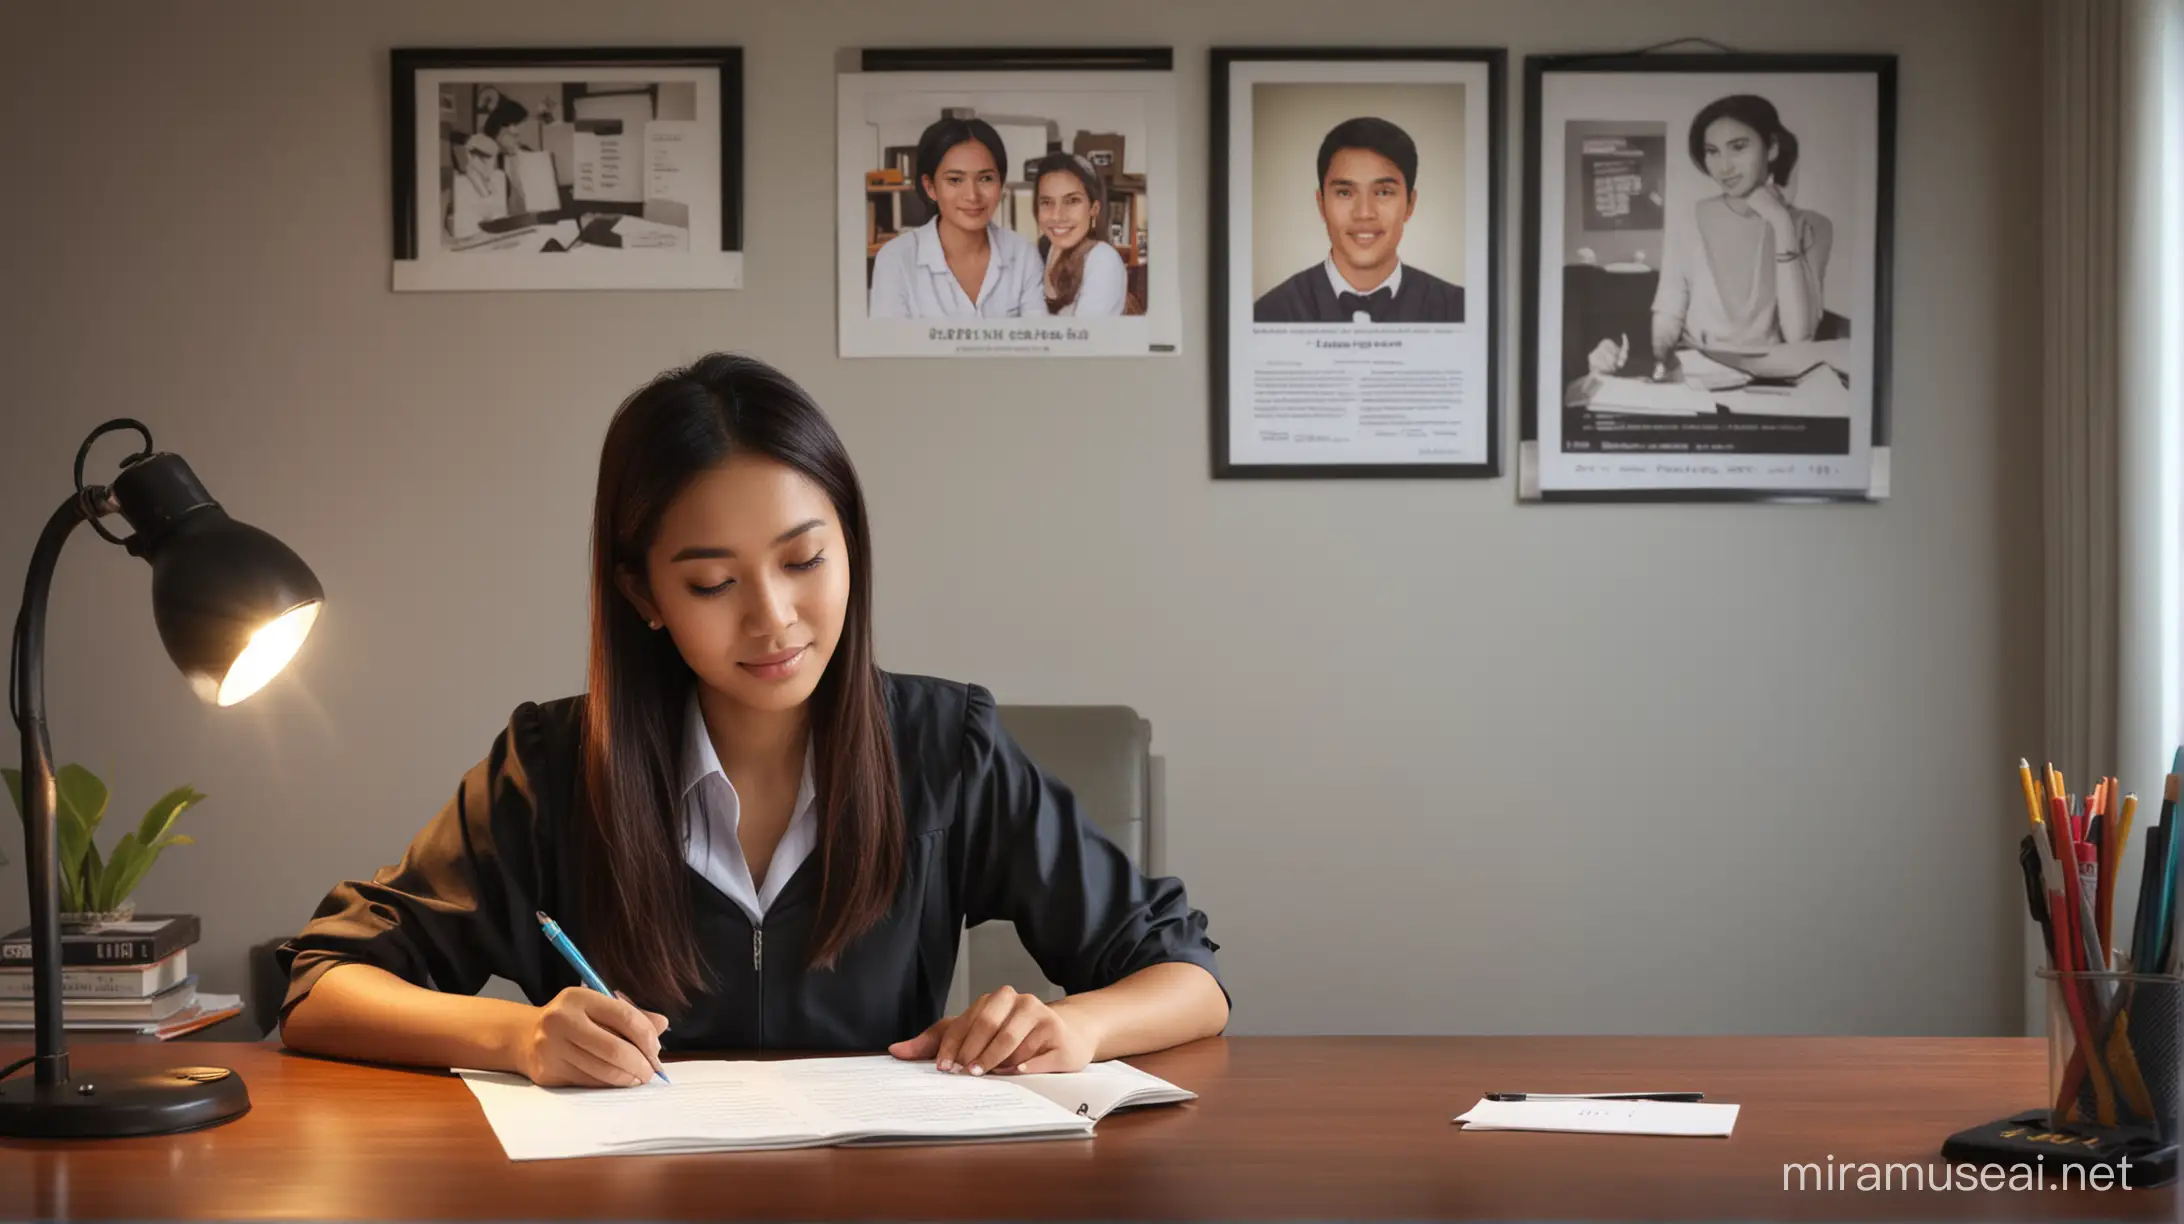 Indonesian Woman Writing Curriculum Vitae in Neat Room with Graduation Photo